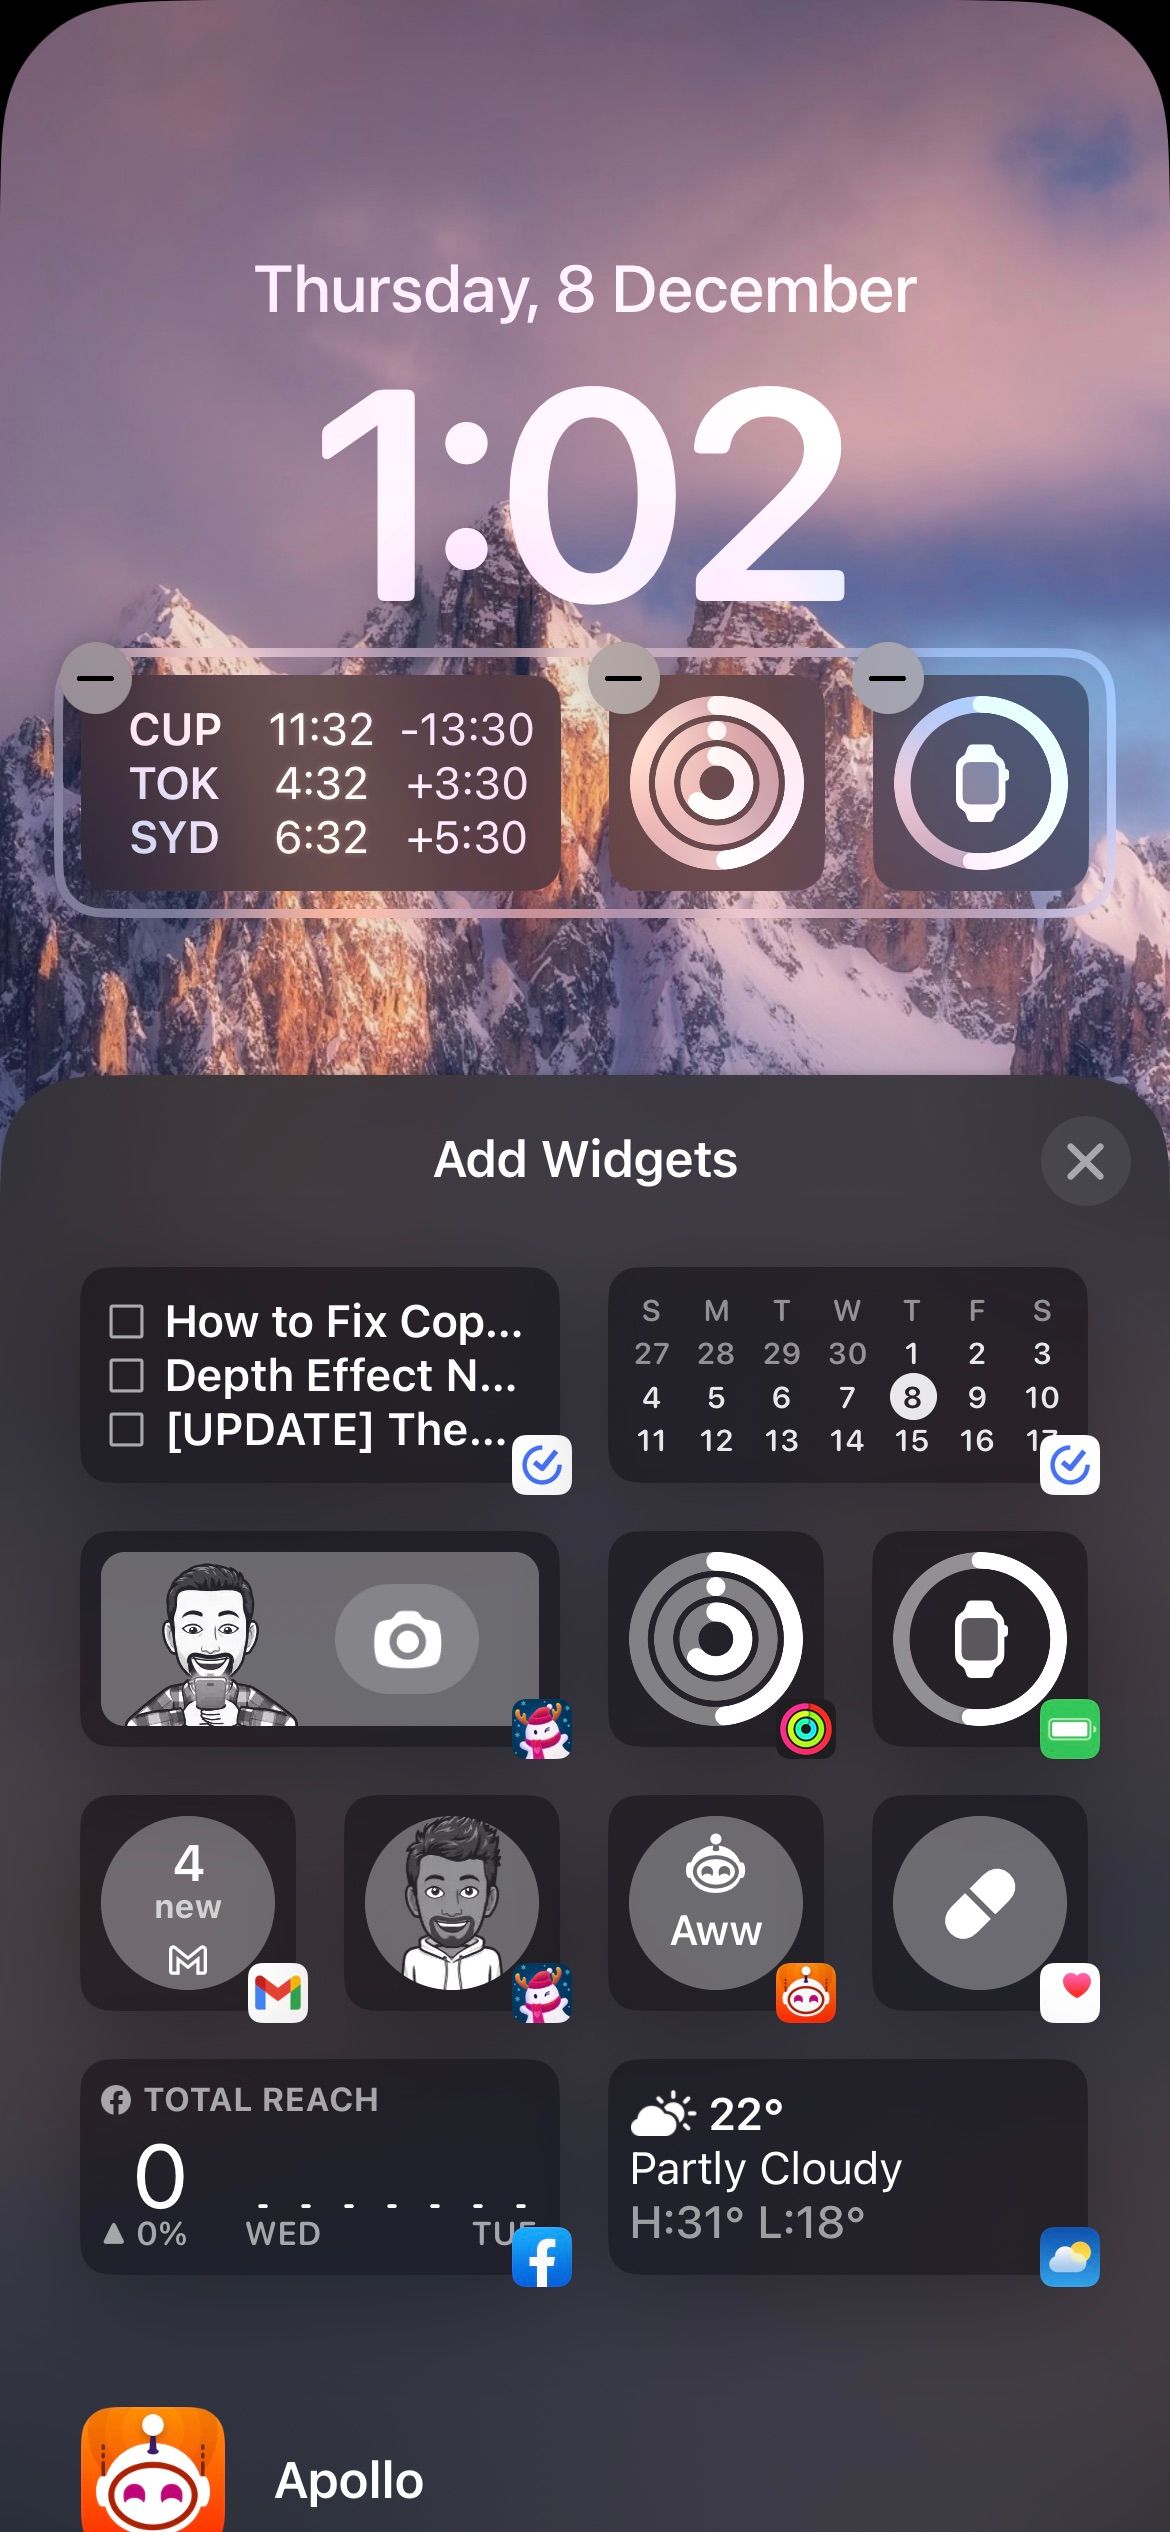 Remove Lock Screen Widgets by Tapping on them